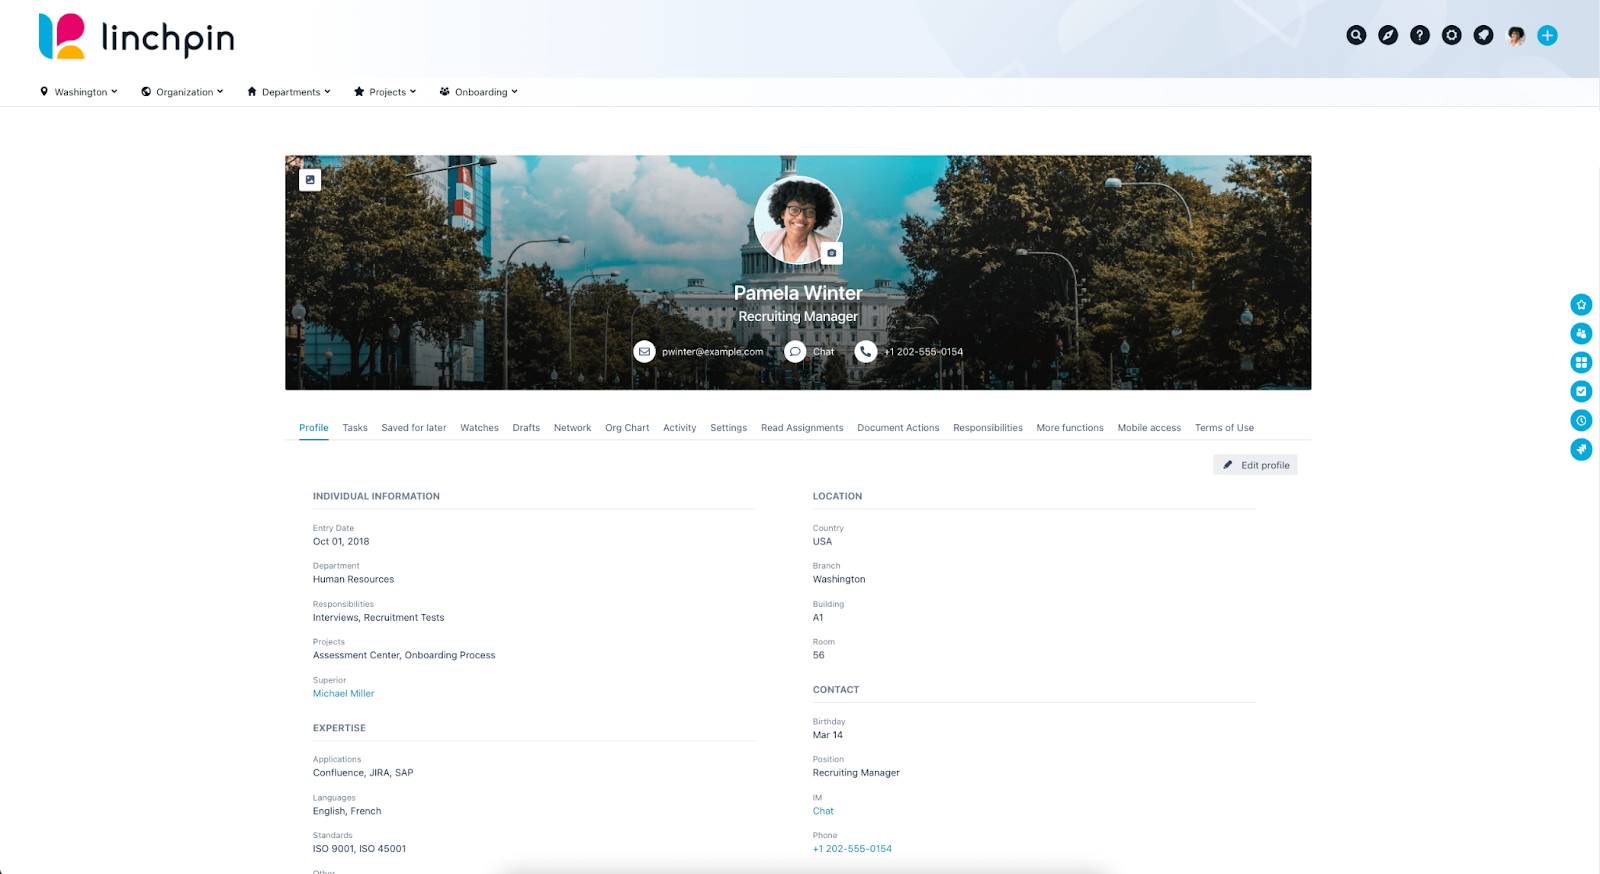 Linchpin Intranet Suite - Lonely Workers - profile of an employee